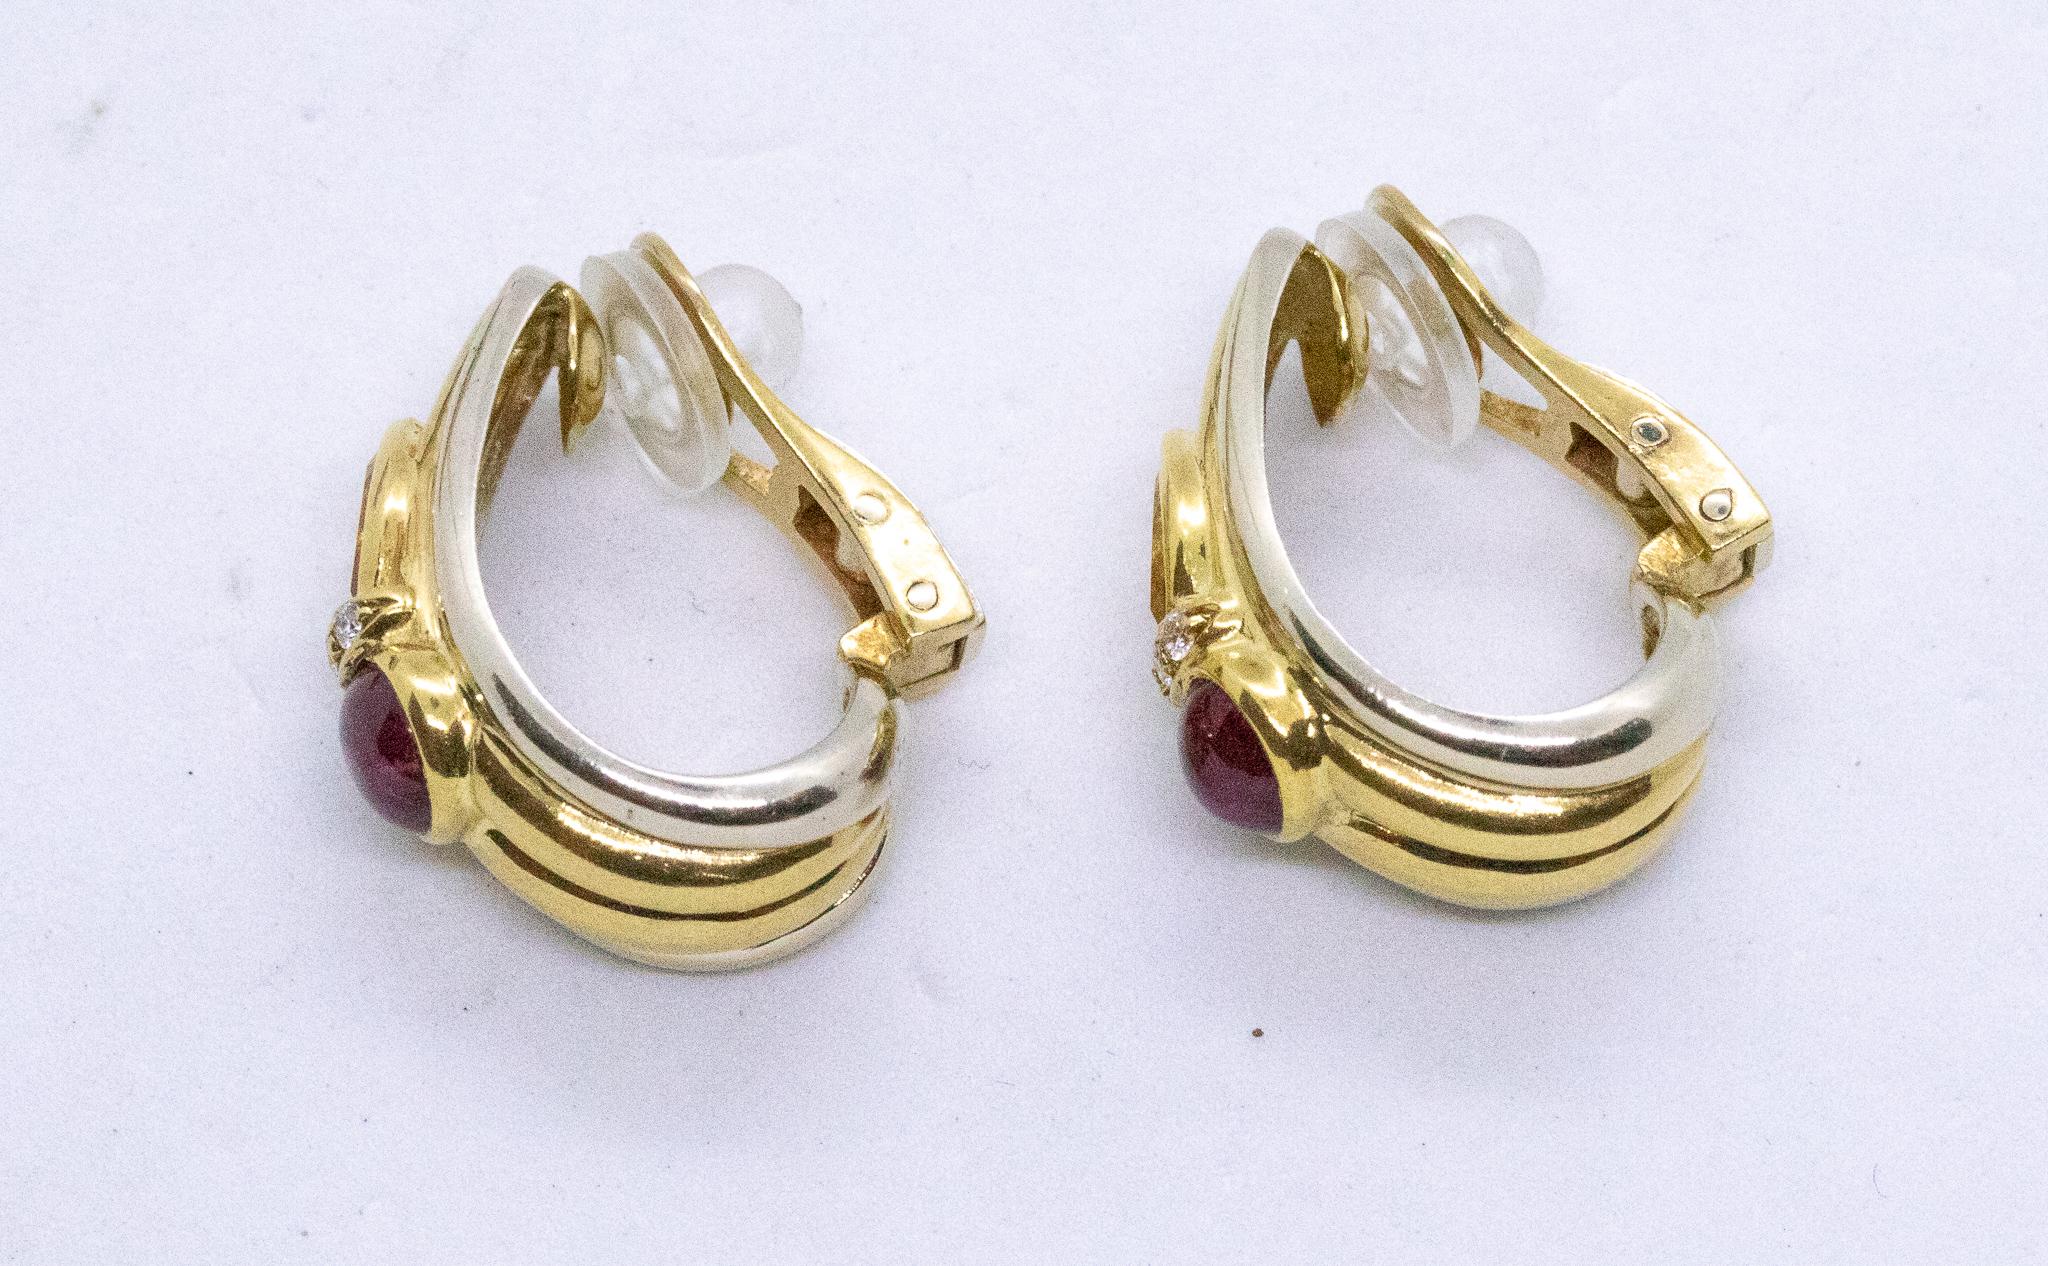 Chaumet Paris Clips Earrings in 18Kt Gold with 2.34 Cts Rubies Sapphires Diamond 3